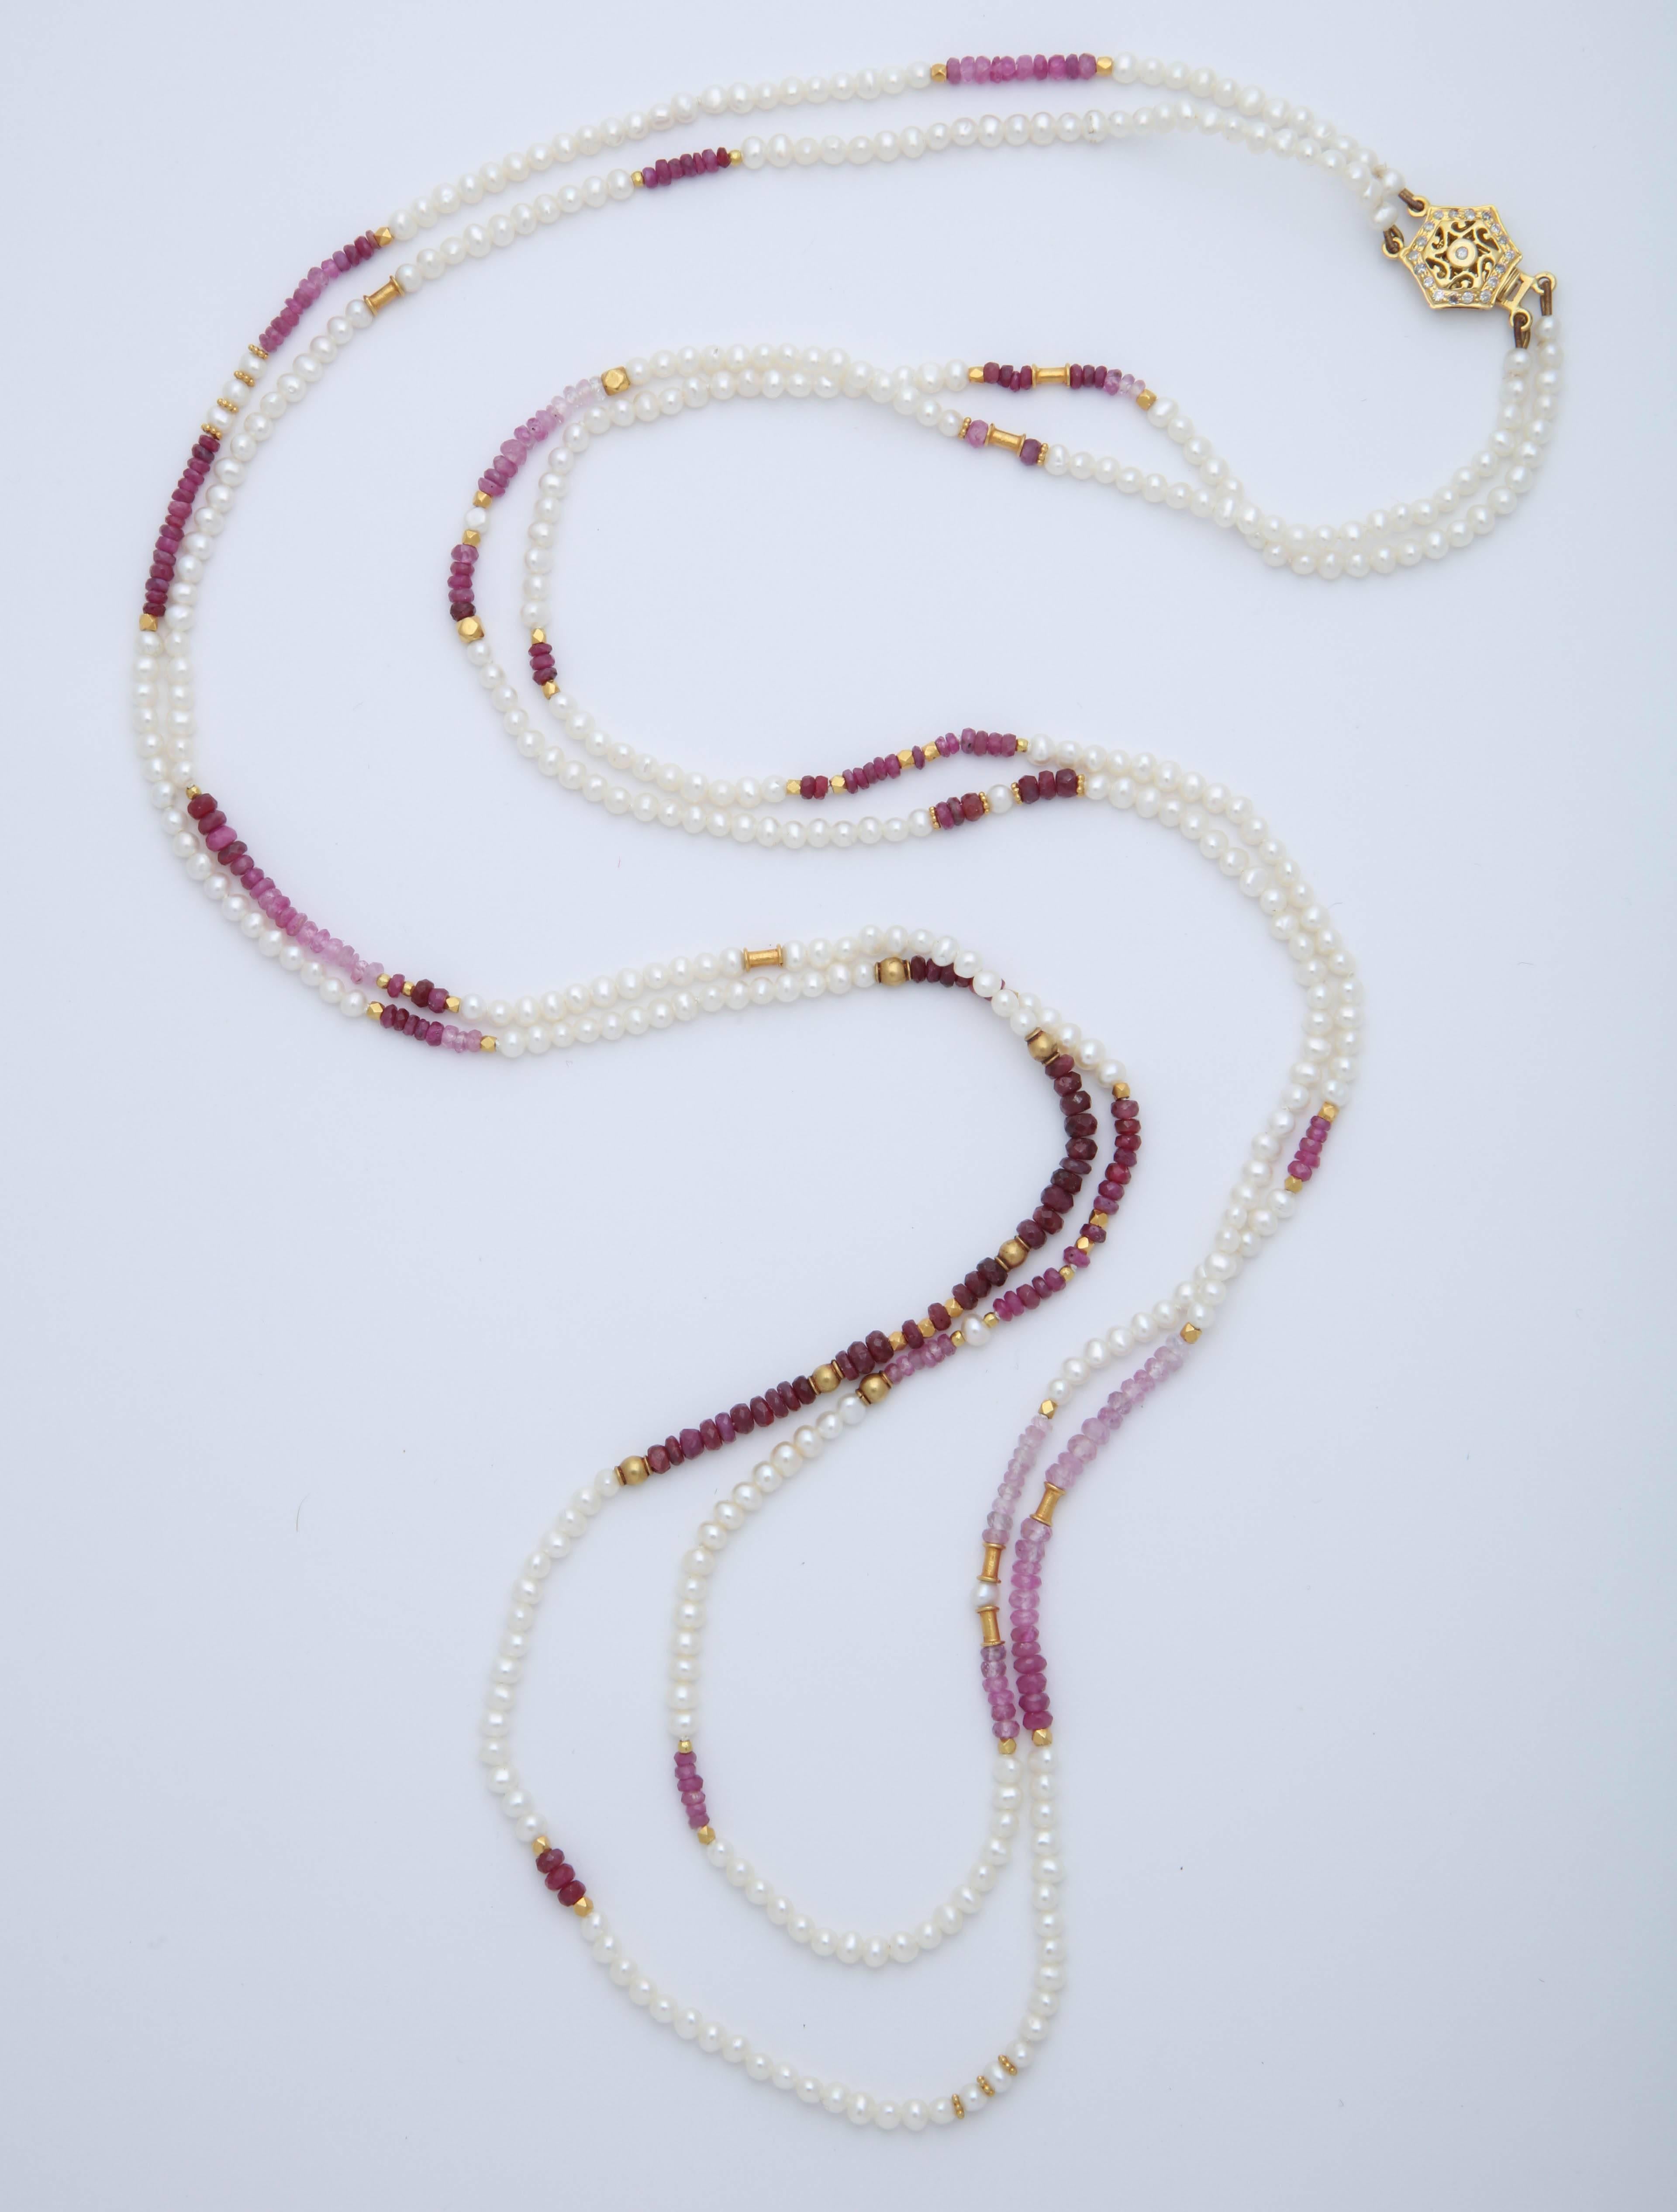 This is a double strand of natural ruby beads, 18 kt gold beads and white fresh water pearls. It is 31 in. long and closes with an 18 kt gold and diamond clasp. This can be wrapped twice around the neck or also  wrapped as a bracelet.